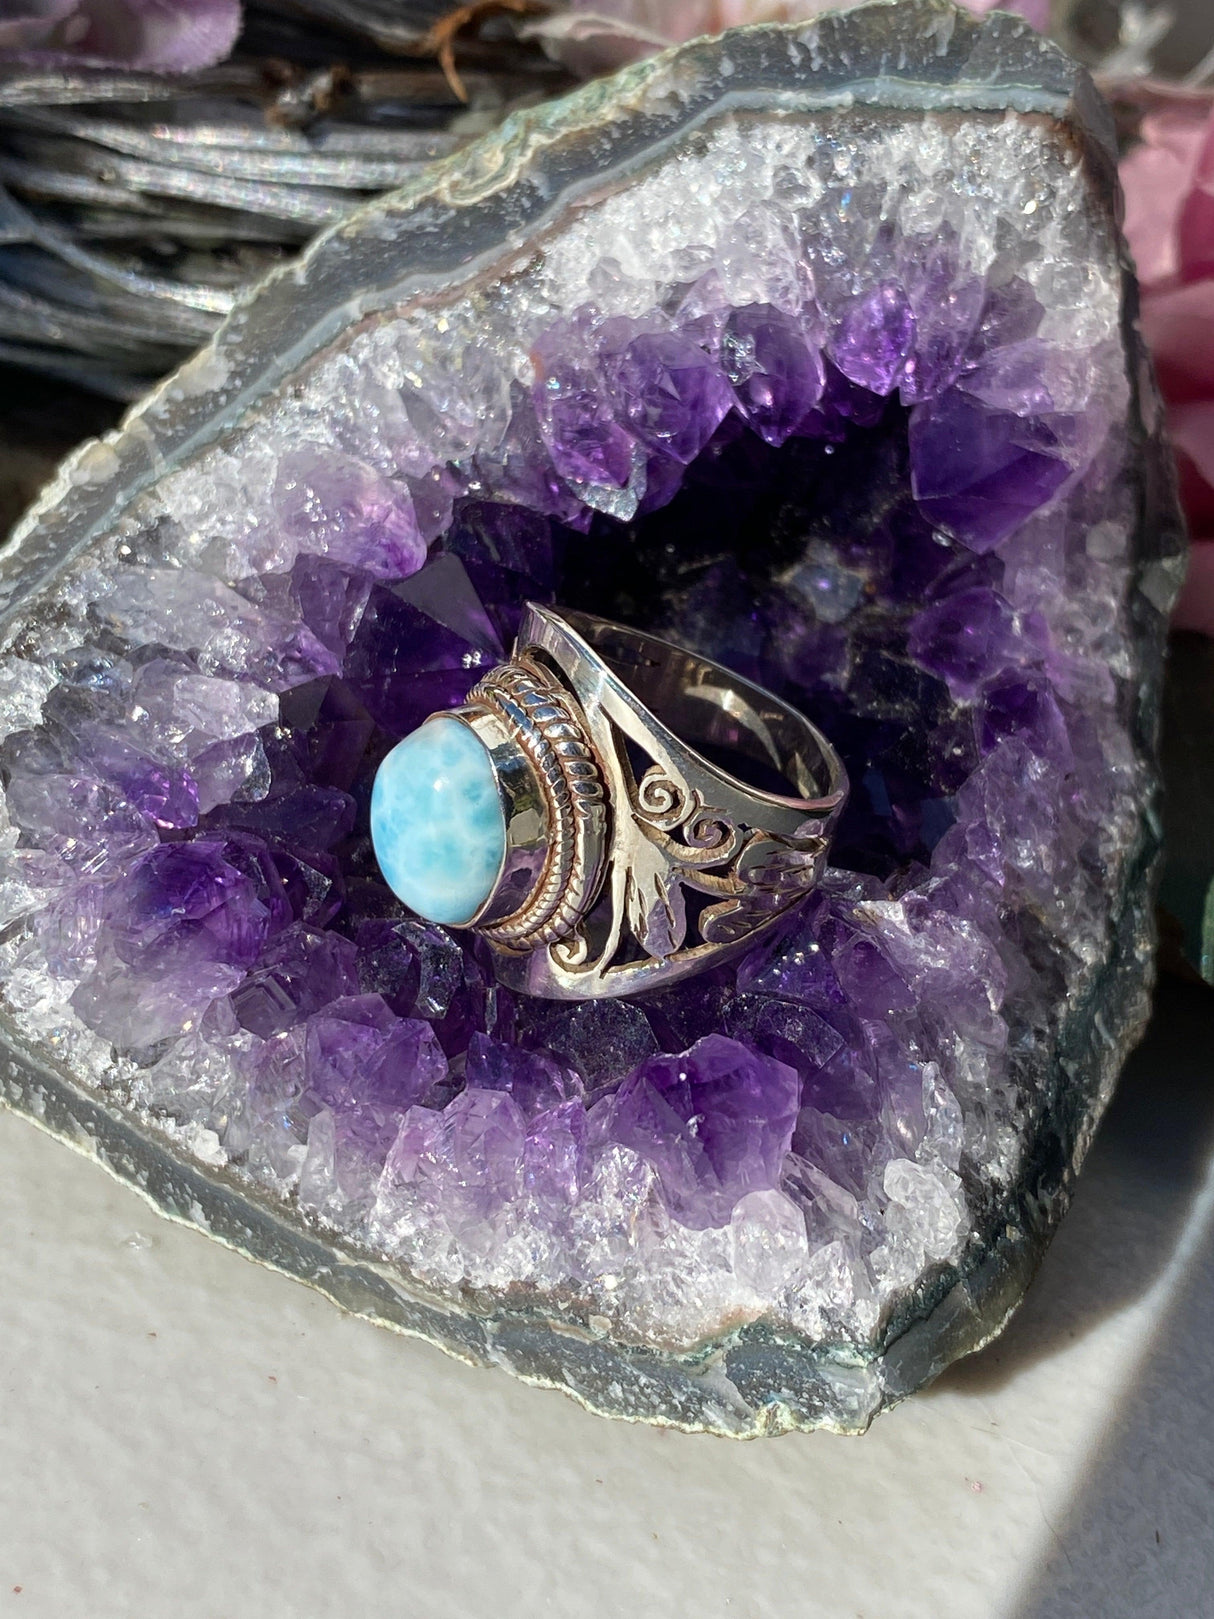 Larimar oval cabochon ring with detailed banding s6 KRGJ243 - Nature's Magick